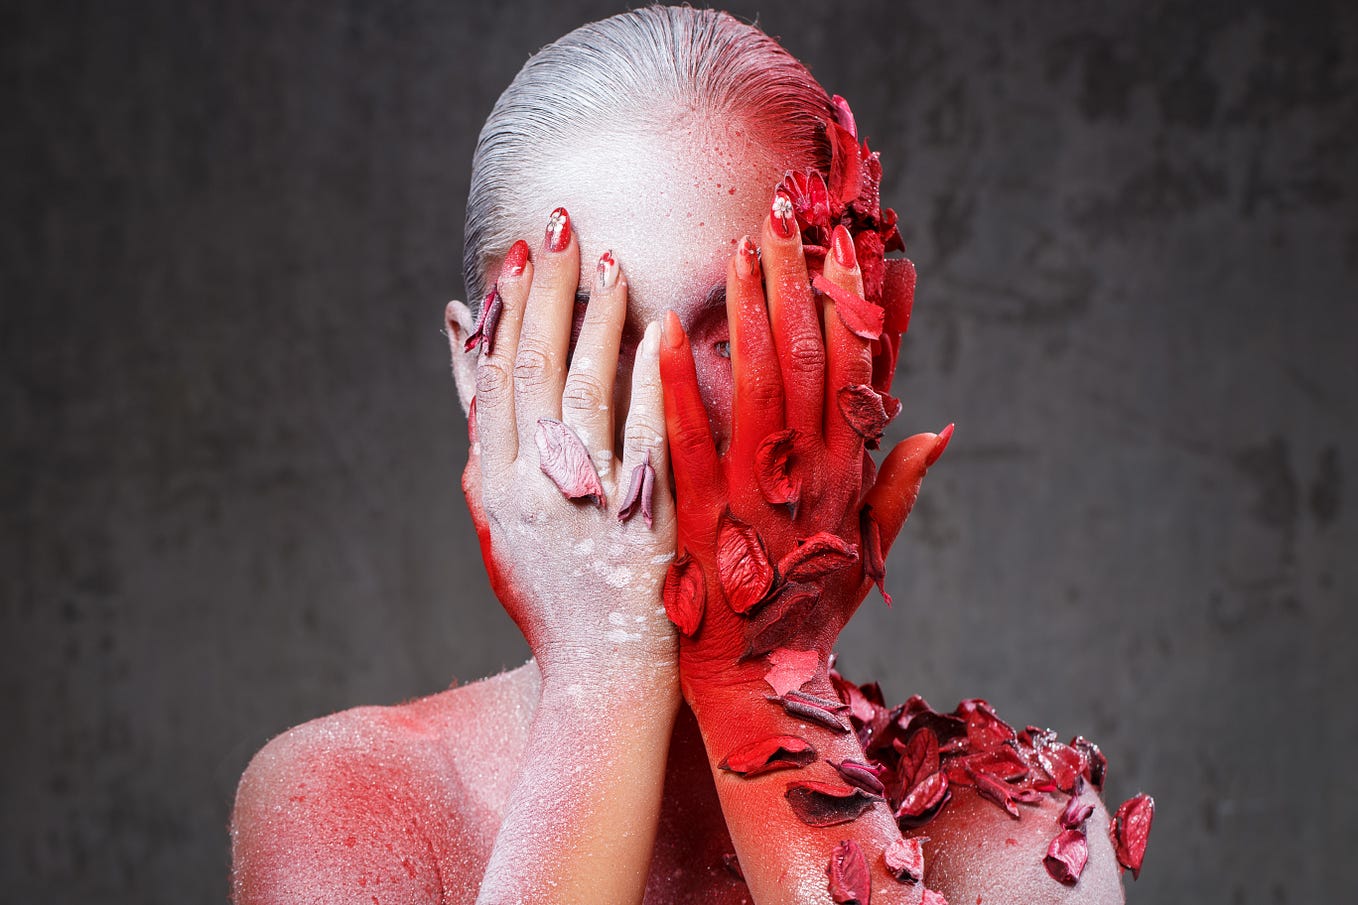 Headshot of a woman with her hands covering her face. She is spray-painted white on one side and red on the other. There are also leaves clinging to her. They too are spray painted.